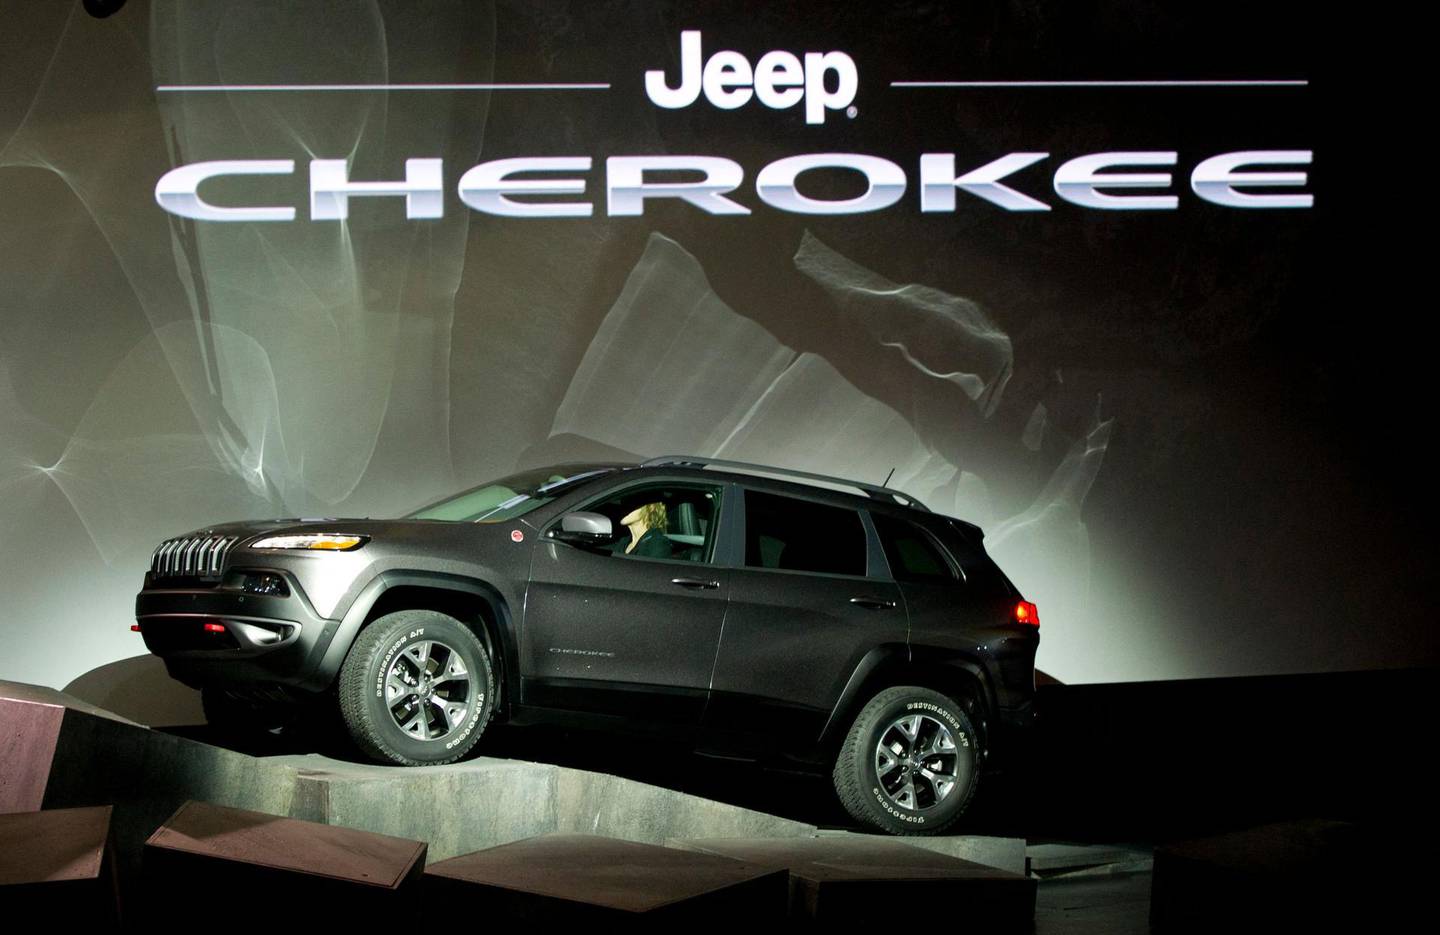 (FILES) In this file photo s new Jeep Cherokee makes its way over obstacles during a media conference at the New York International Auto show March 27, 2013 in New York. On February 22 the Cherokee Nation said it has asked for its tribal name to be removed as a nameplate from Jeep sport utility vehicles and called for a dialogue with the automaker on "cultural appropriateness."
The Native American group's principal chief Chuck Hoskin Jr asked Jeep's parent firm Stellantis "he does not condone" the use of the name Cherokee on the vehicles, according to a statement.
 / AFP / Don EMMERT
